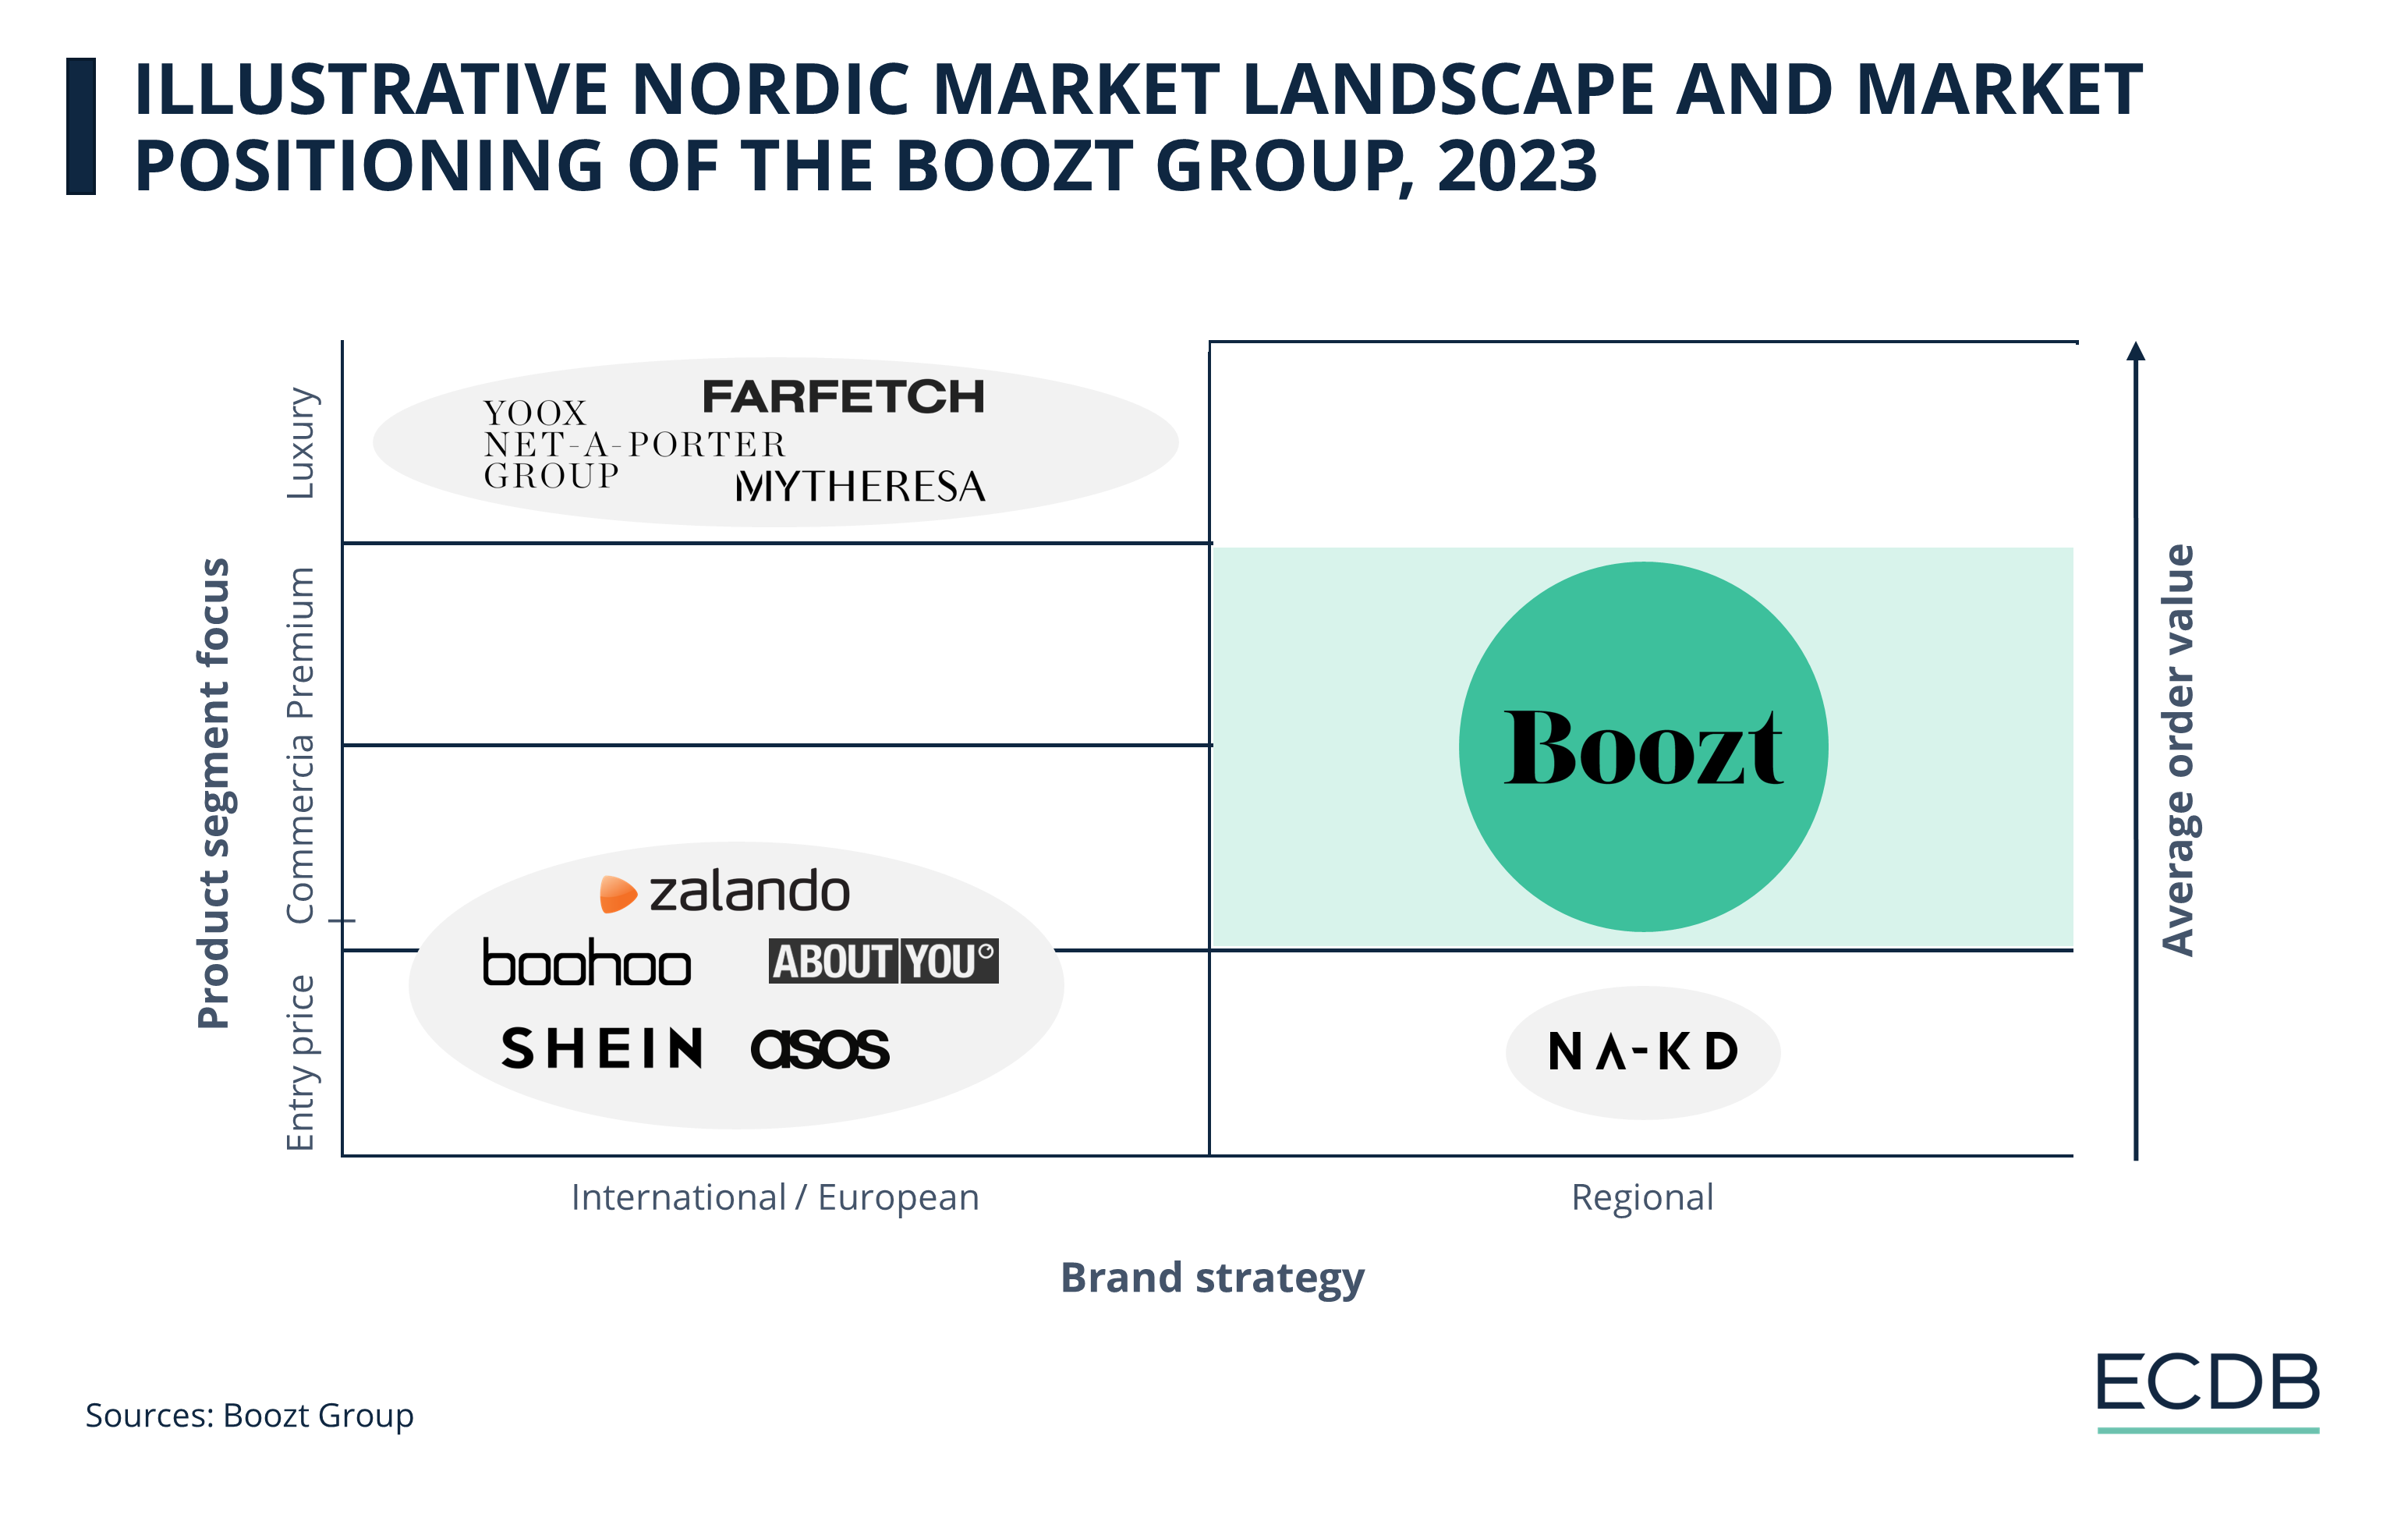 Illustrative Nordic Market Landscape and Market Positioning of the Boozt Group, 2023